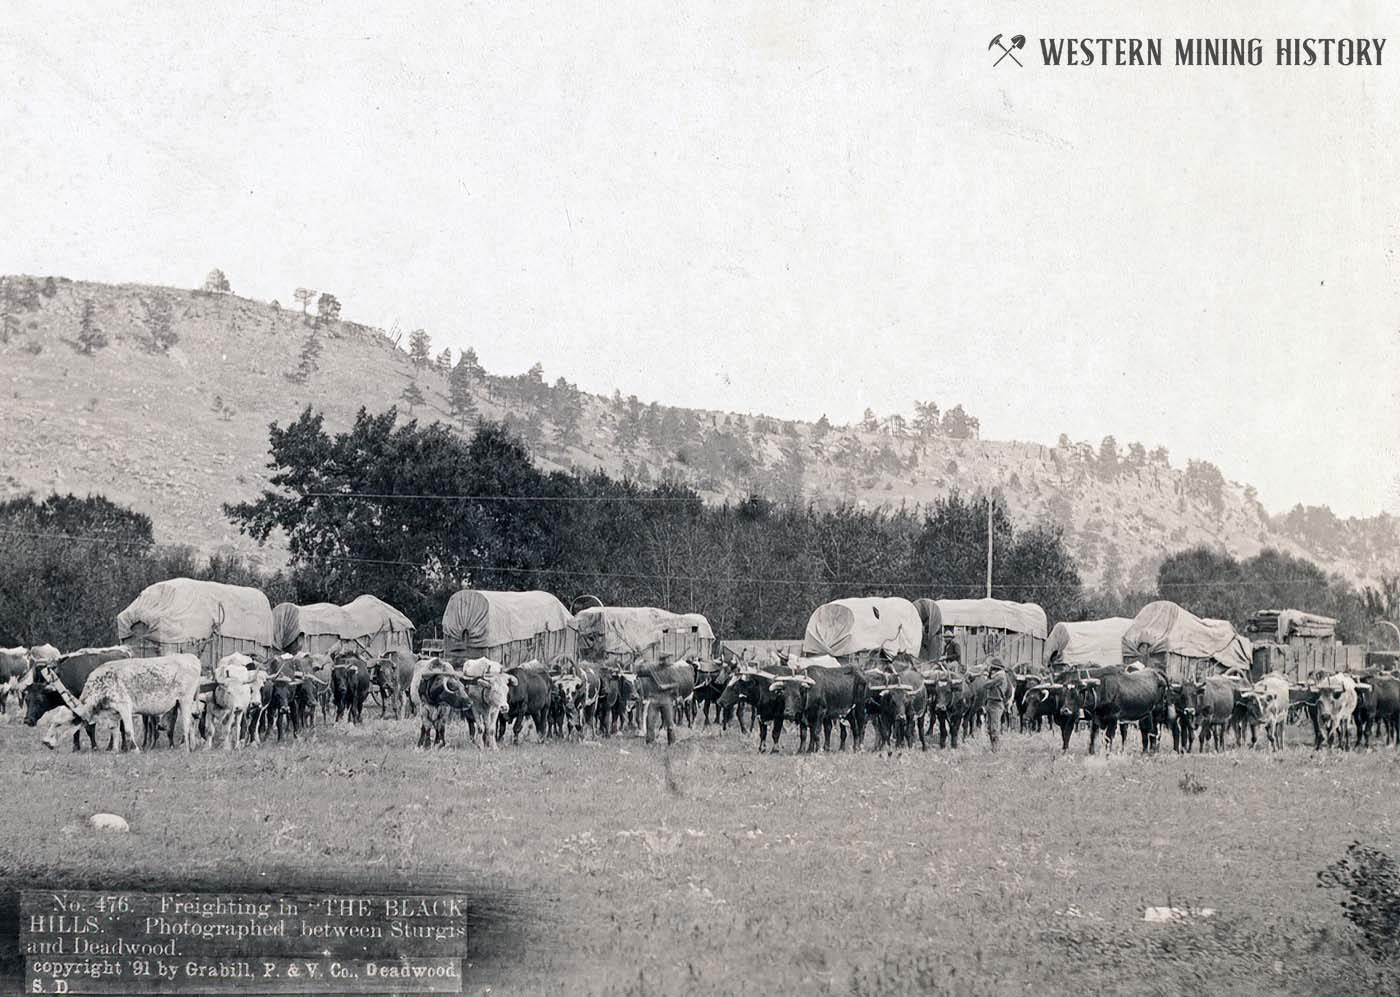 Freighting in The Black Hills